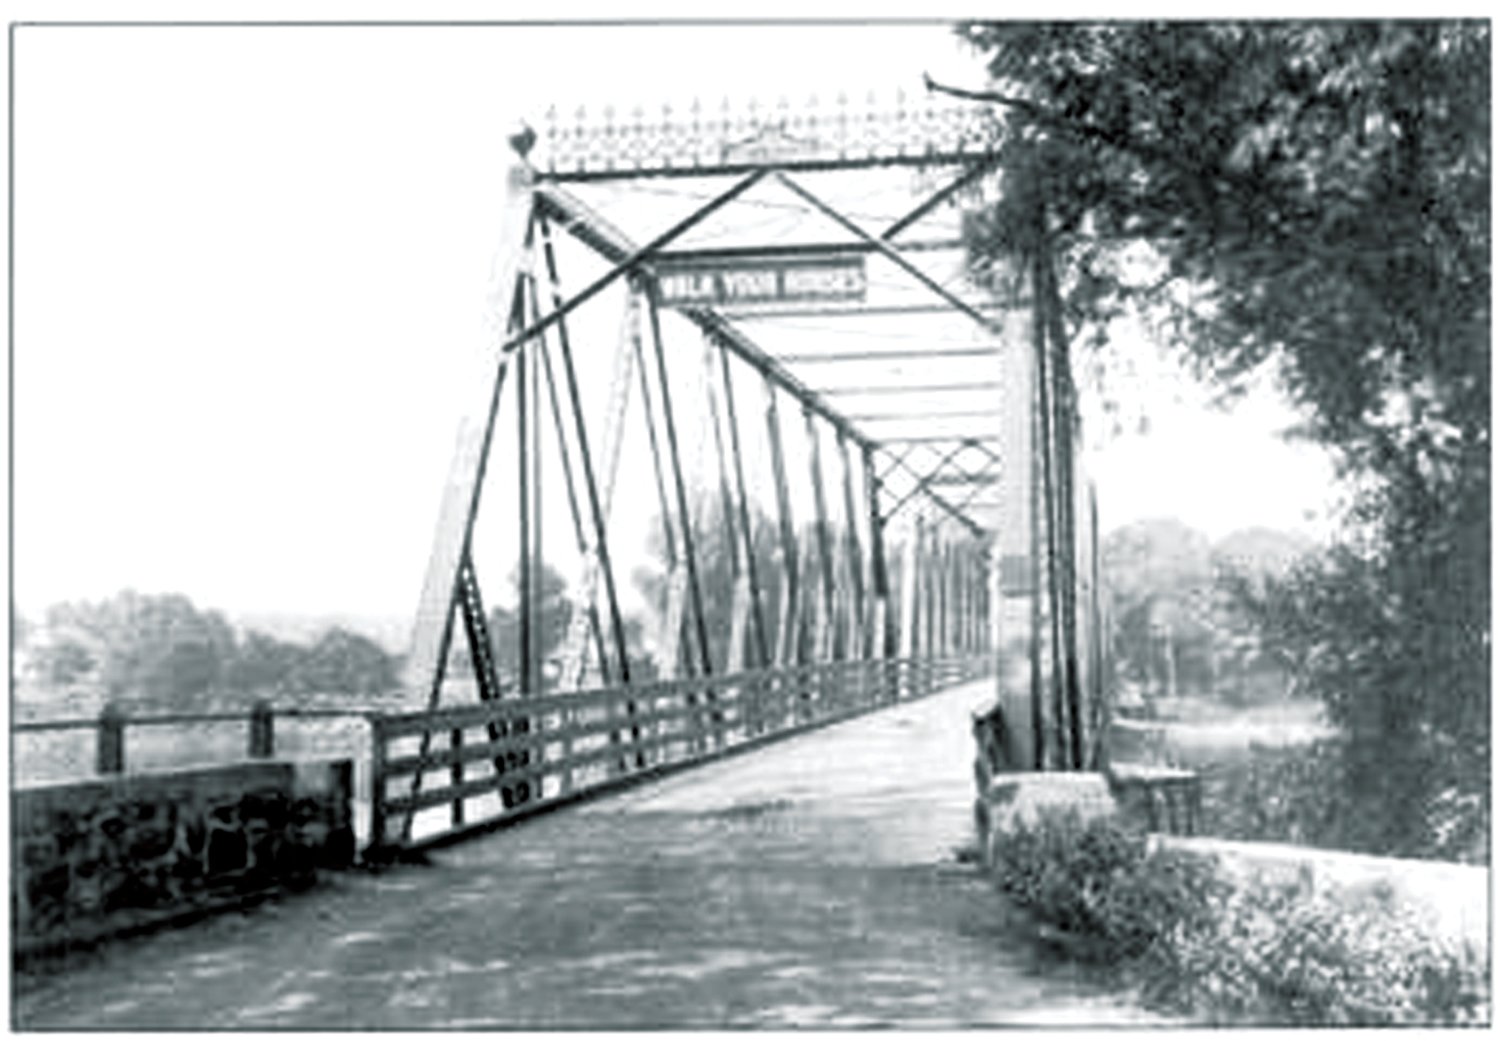 Washington Crossing Bridge shortly after 1905 opening under private toll company.